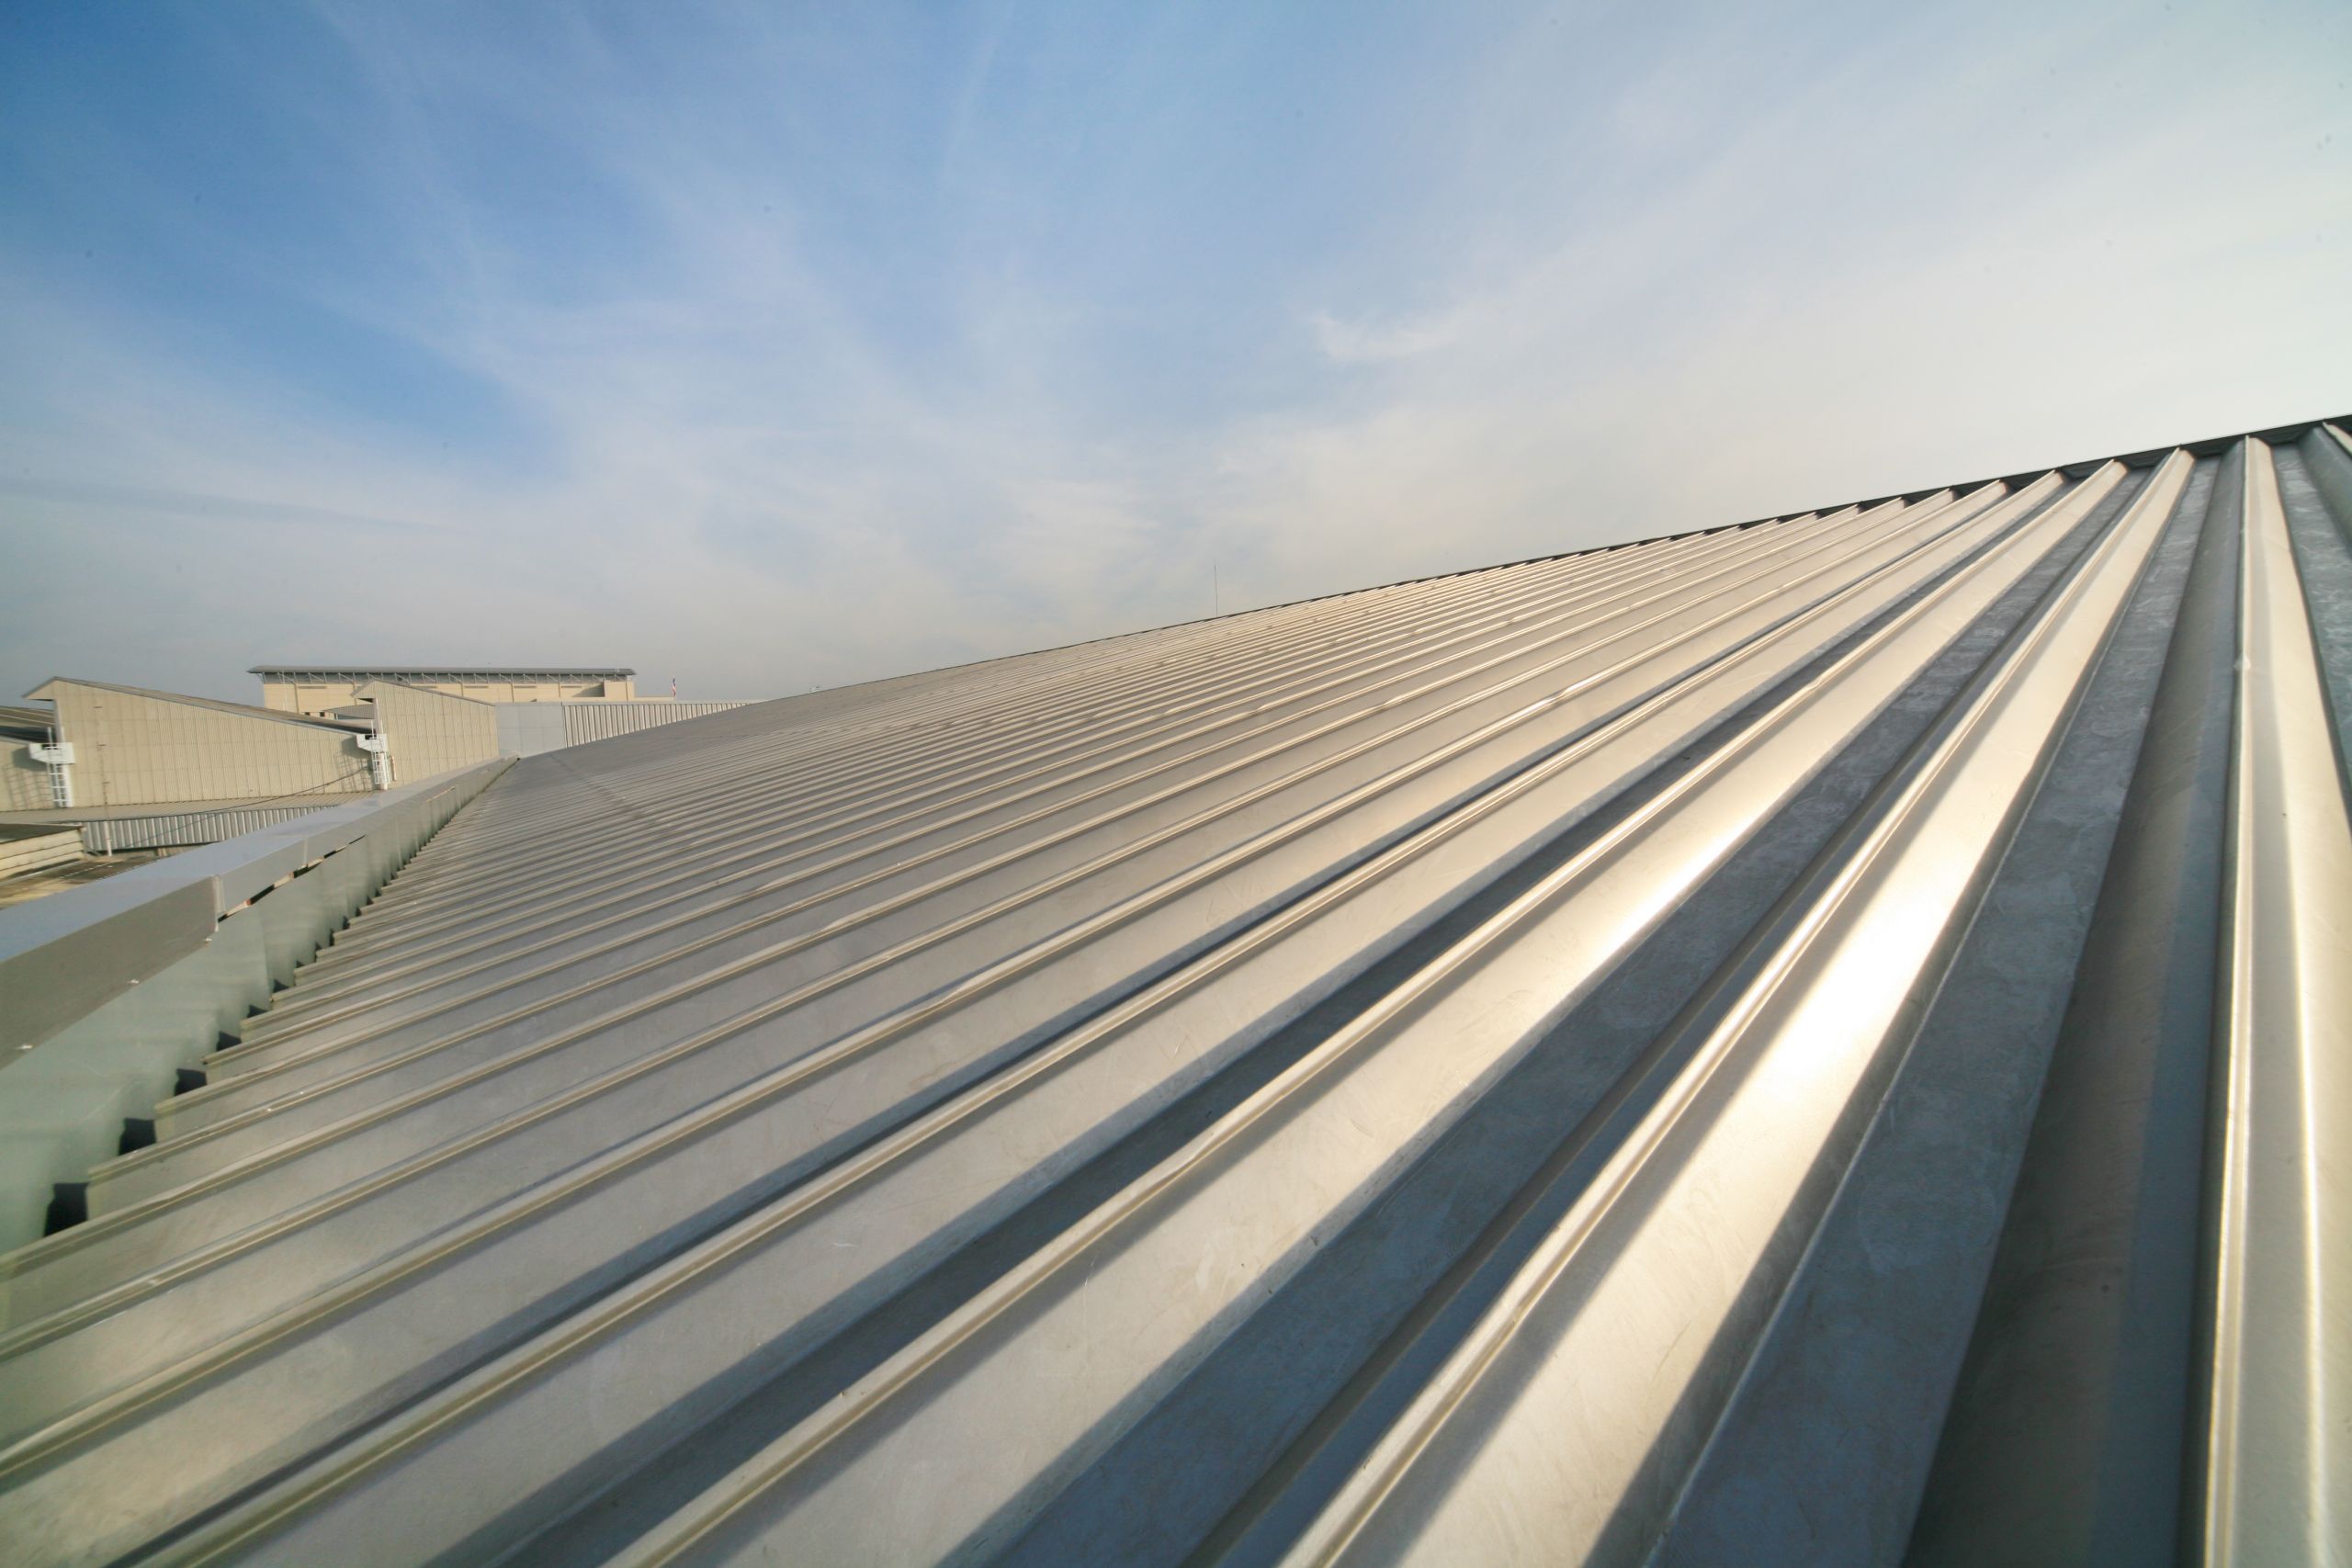 Essex Fells Commercial Metal Roofing Company